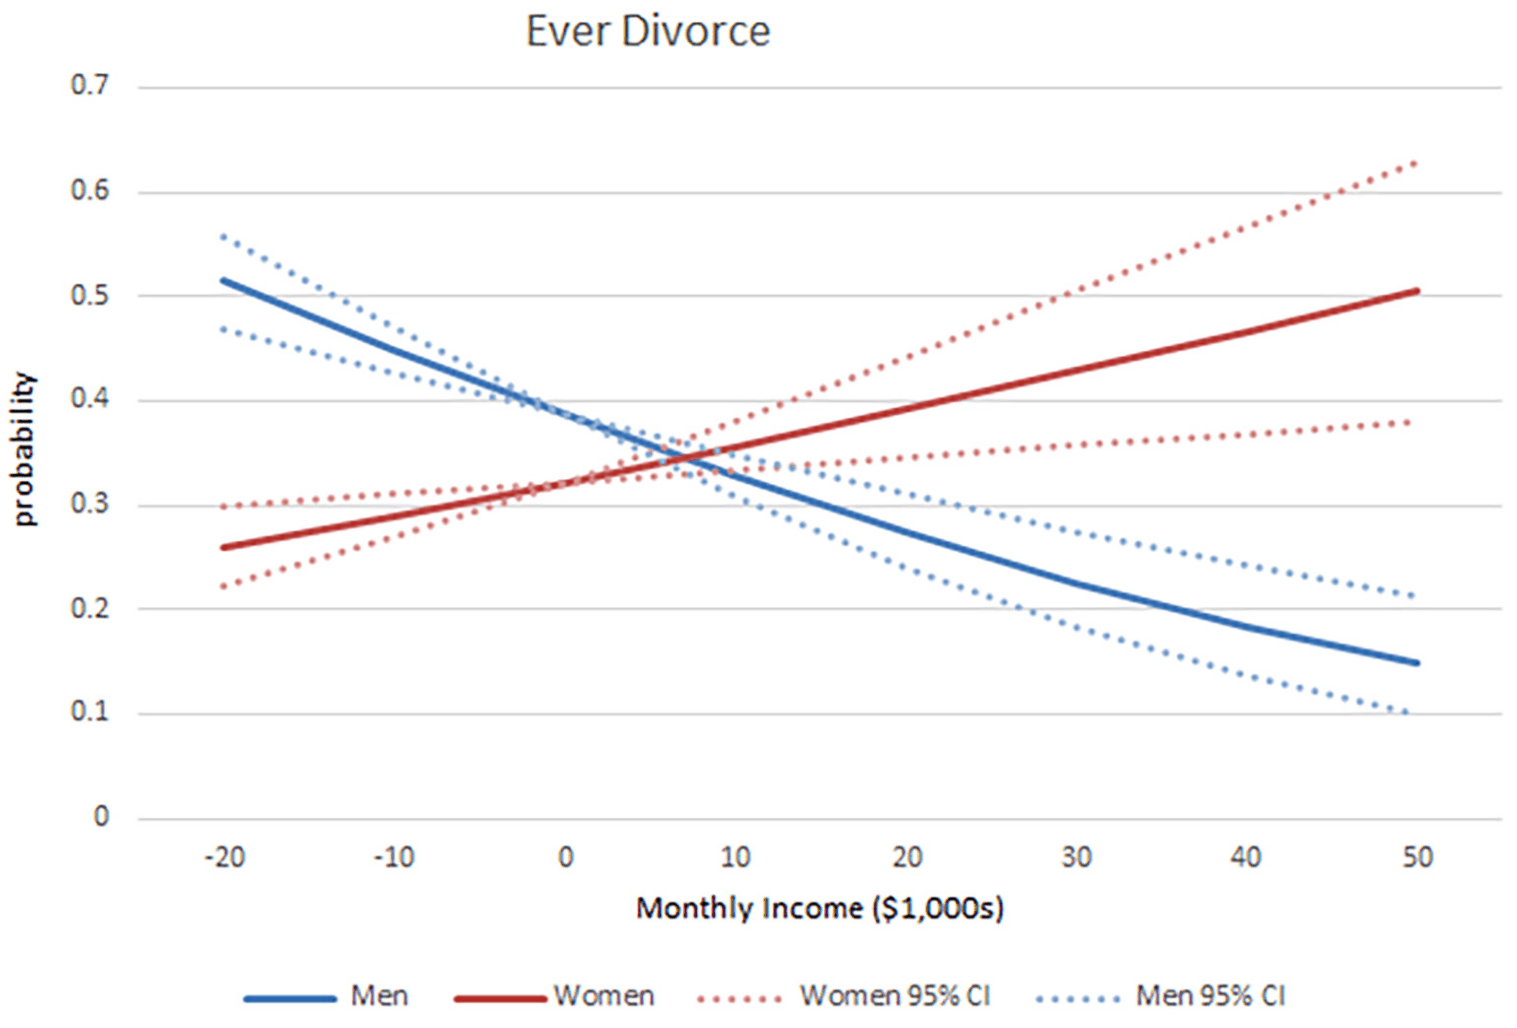 Figure 2: Probability ever having divorced by income. (Model prediction with age, education, proportions Black and Hispanic set to their means.)